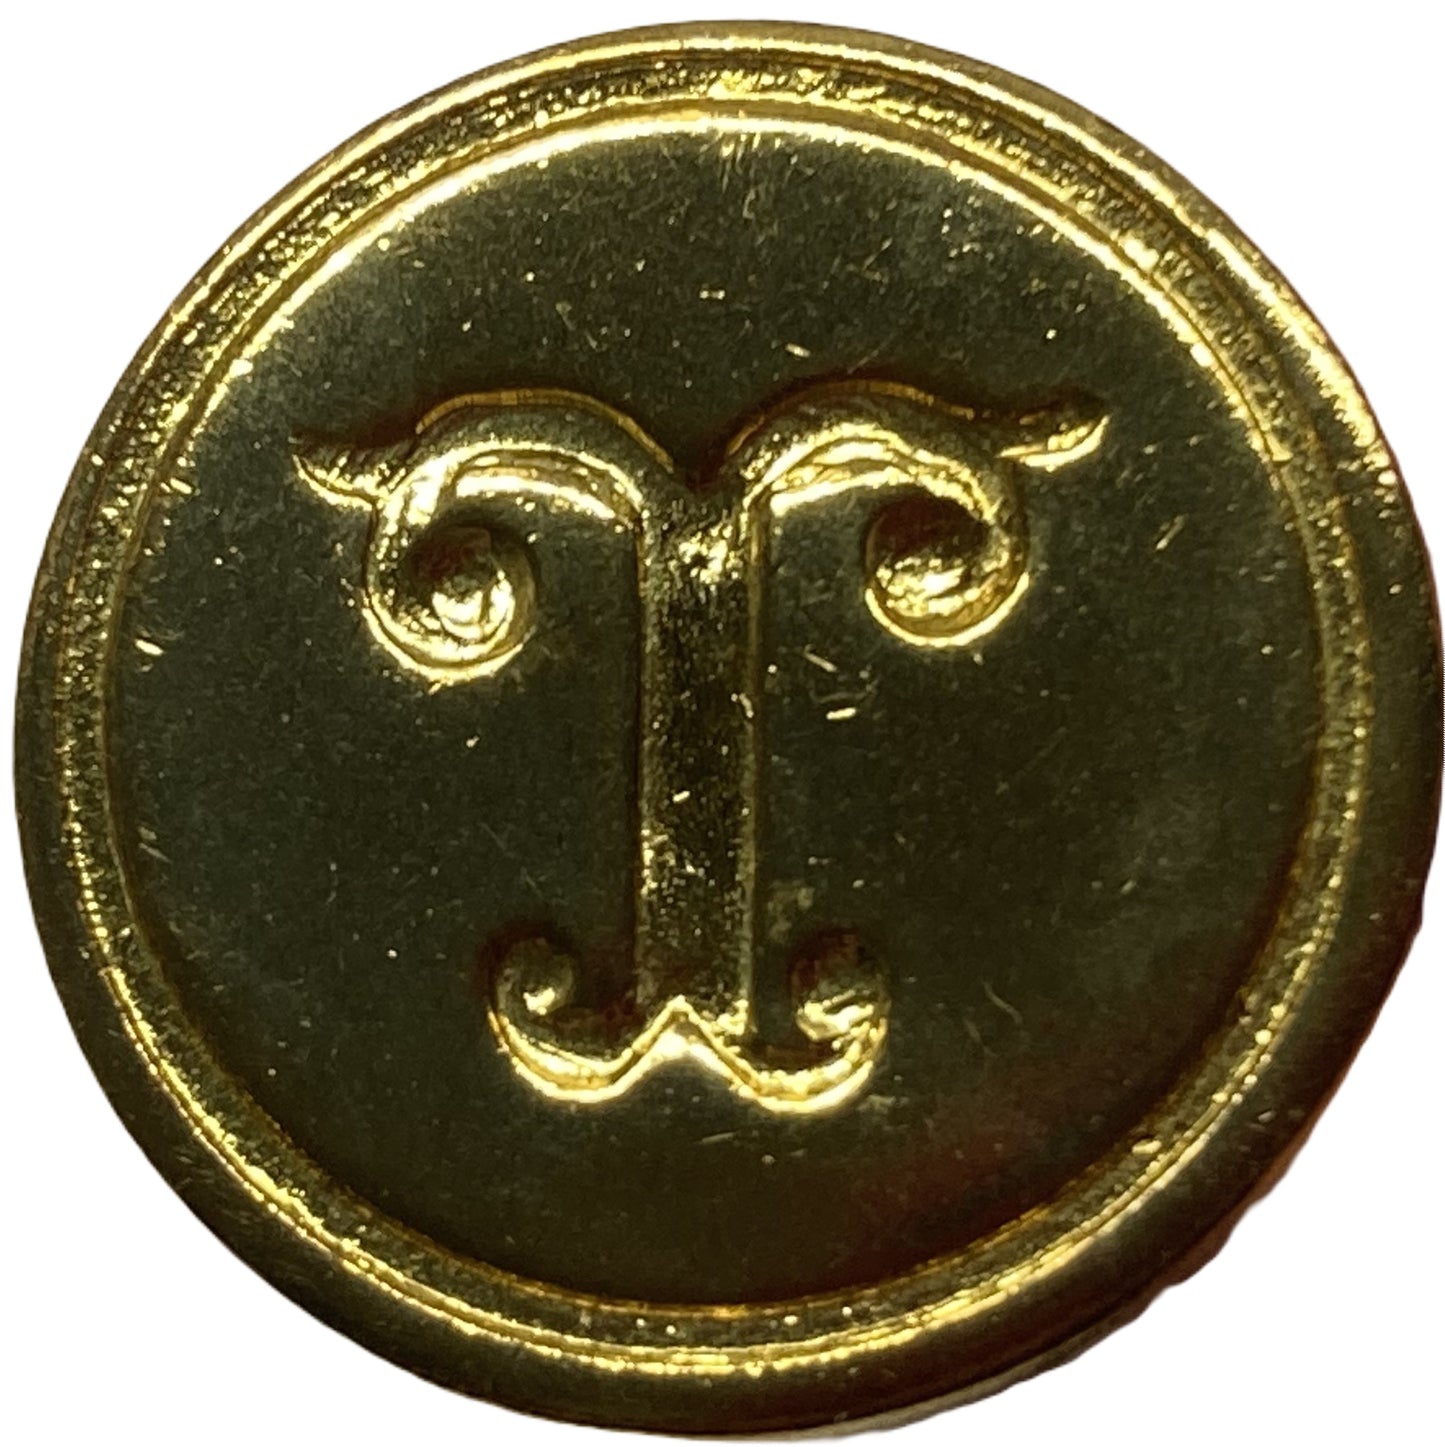 Initial Wax Seal Stamp (3/4" round brass seal & handle, may be imperfect)